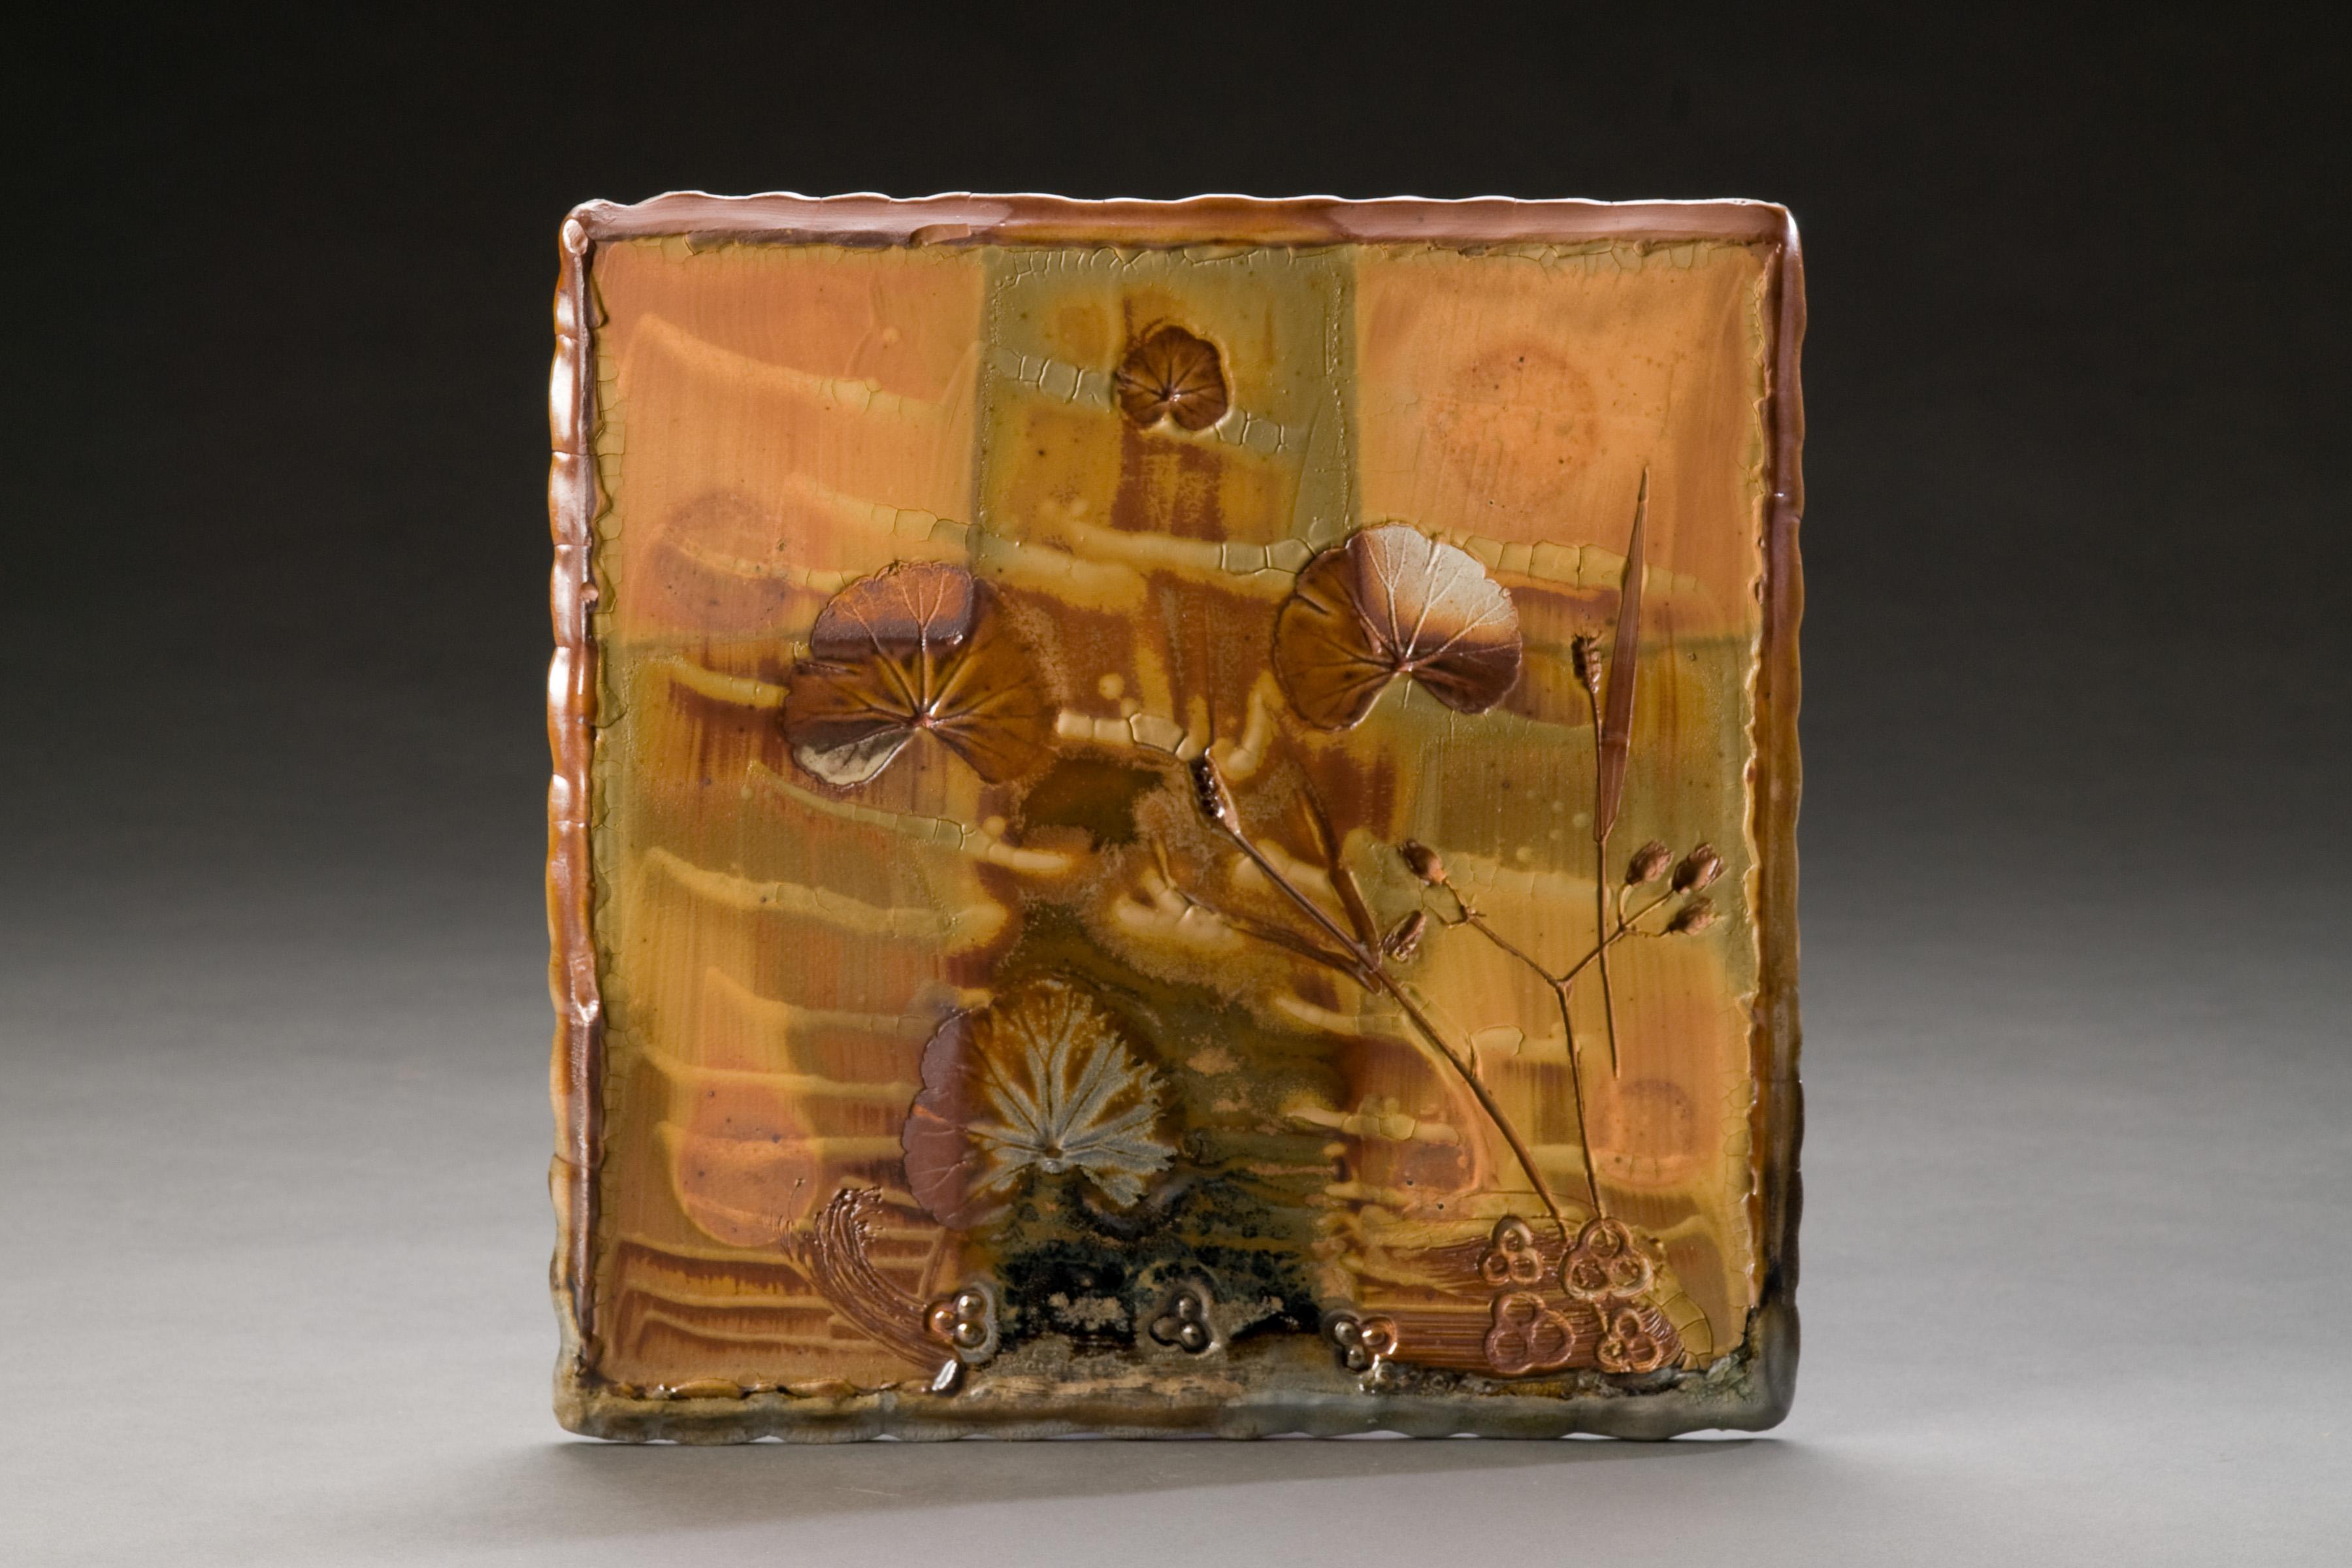 Tony Moore Abstract Sculpture - Wood Fired Ceramic Painting: 'Fire Painting 1.2.10'